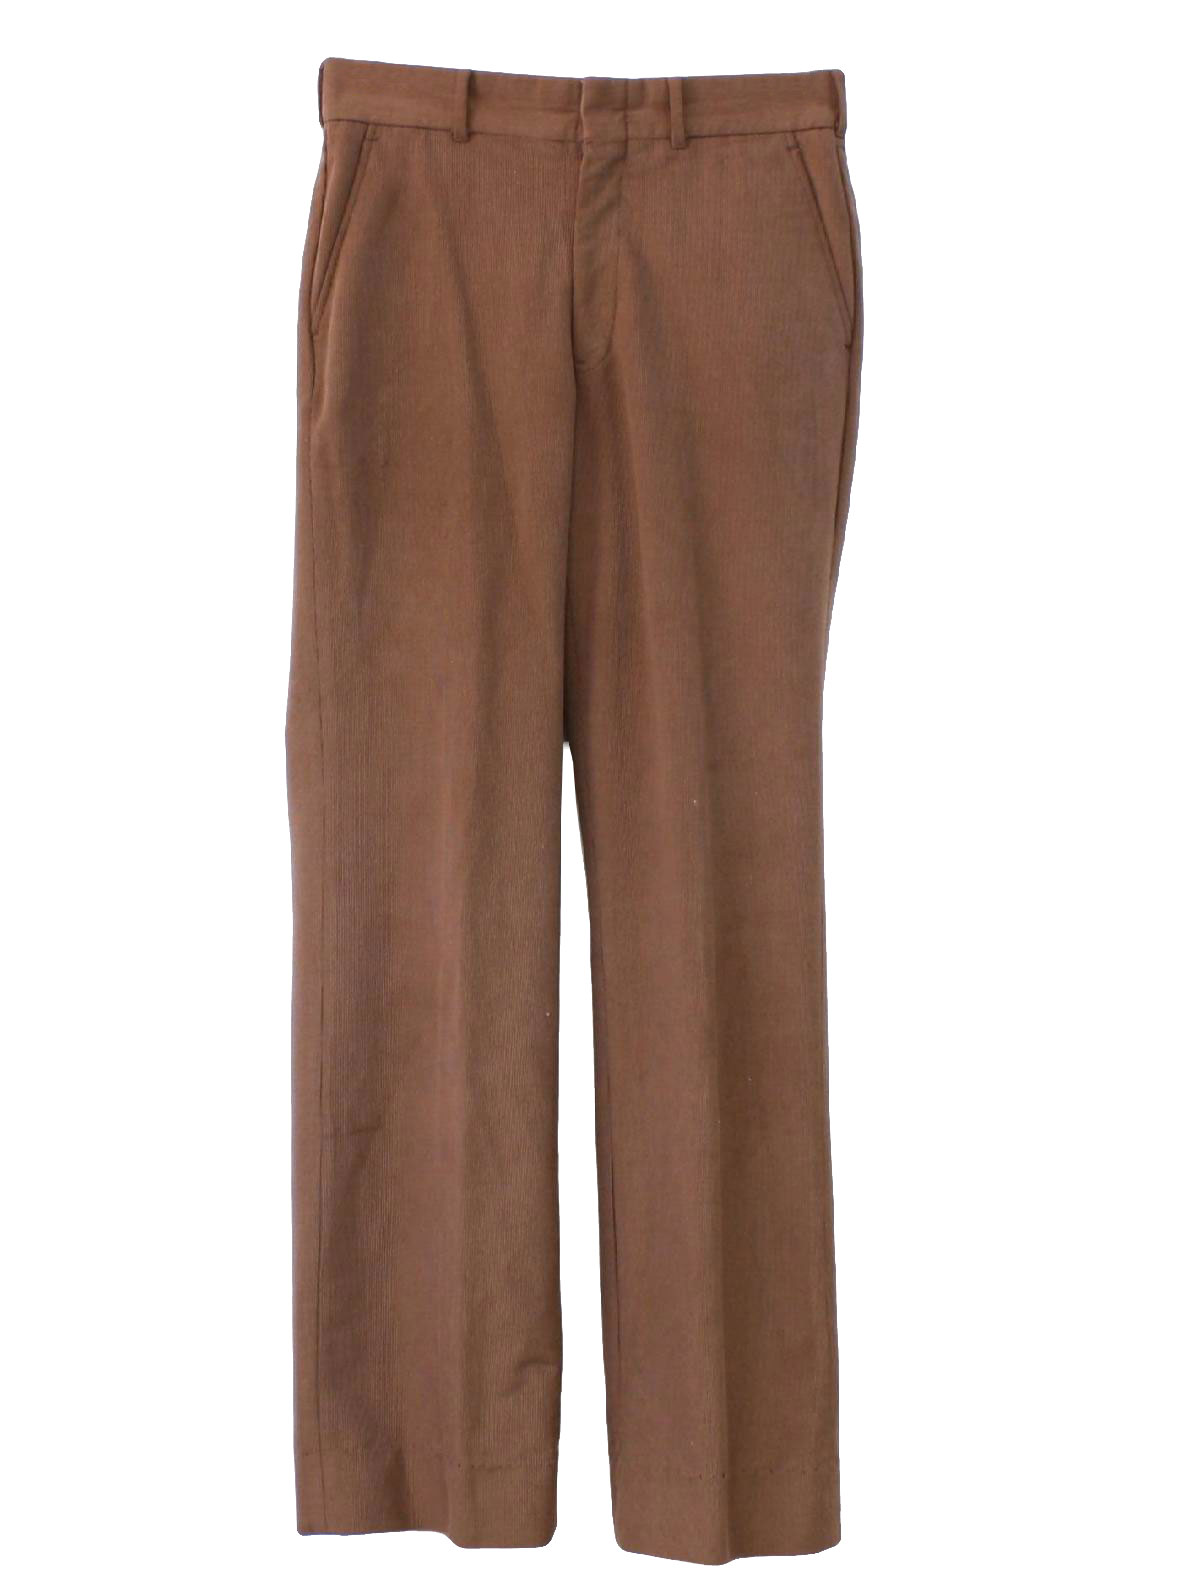 1970s Flared Pants / Flares: 70s -Montgomery Ward Mens Quality Fashions ...